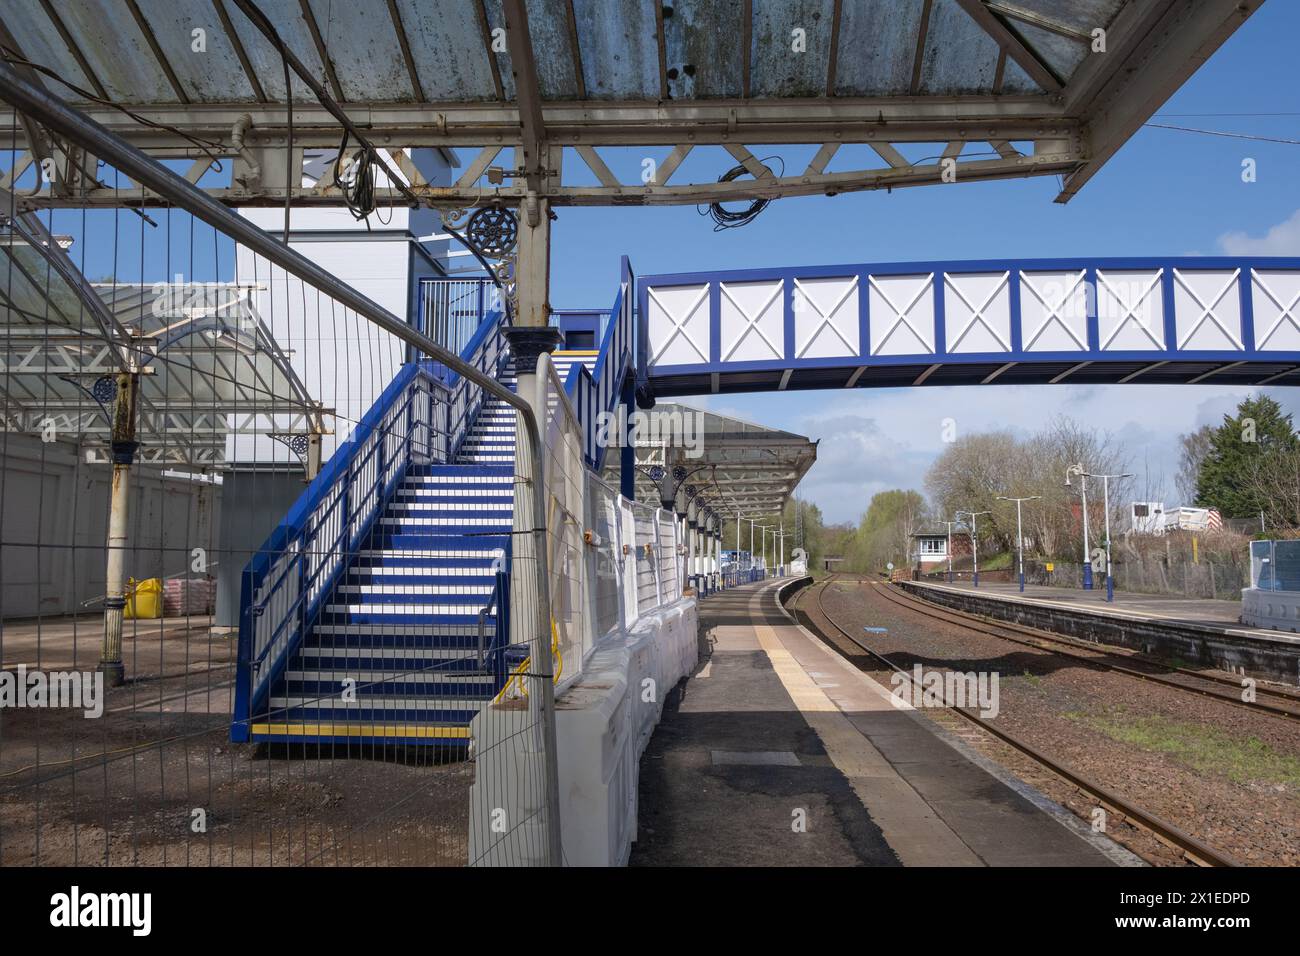 Another view of a new railway station footbridge under construction in Dumfries, Scotland.  The new design includes lifts to improve passenger access. Stock Photo